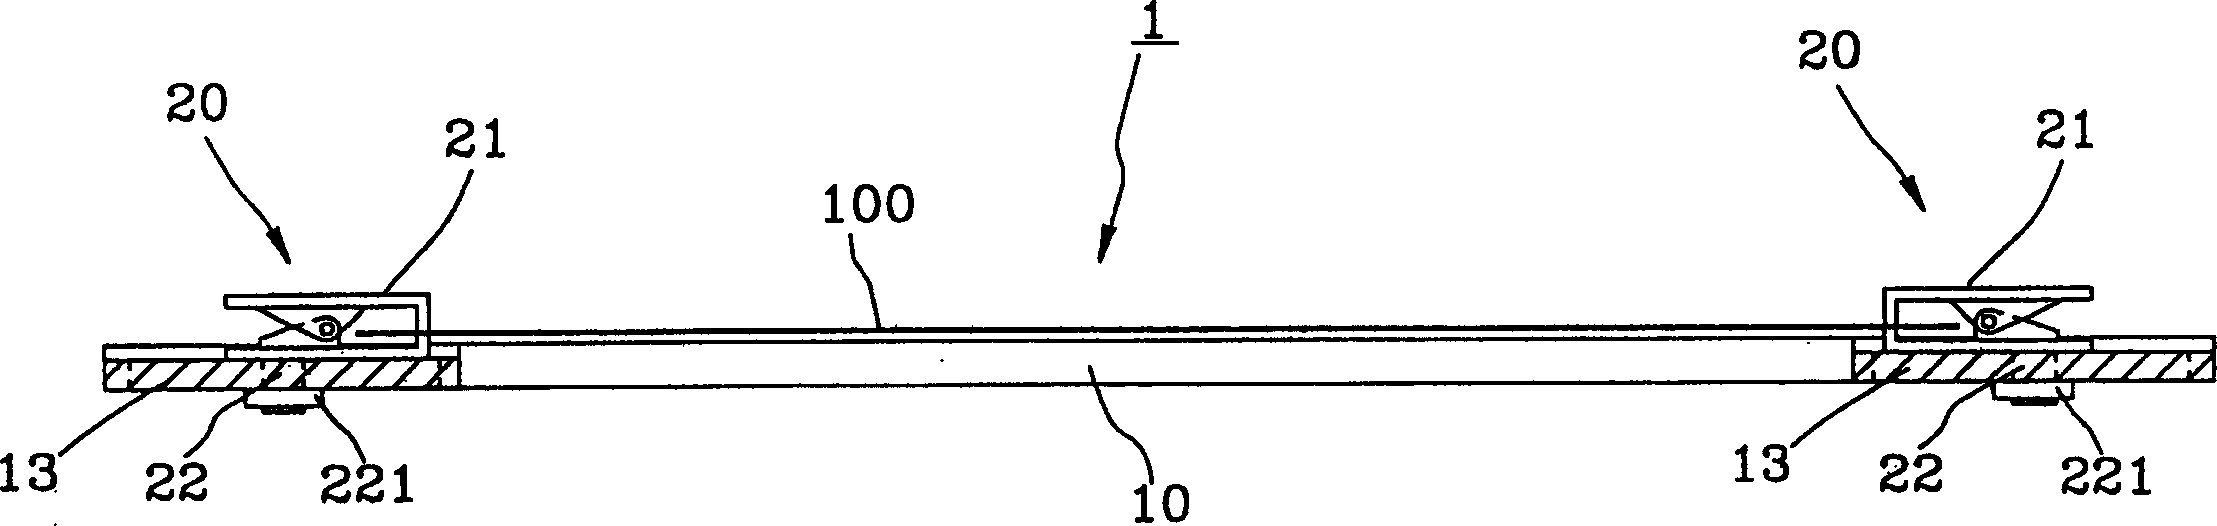 Apparatus for fixing platy object or flaky object